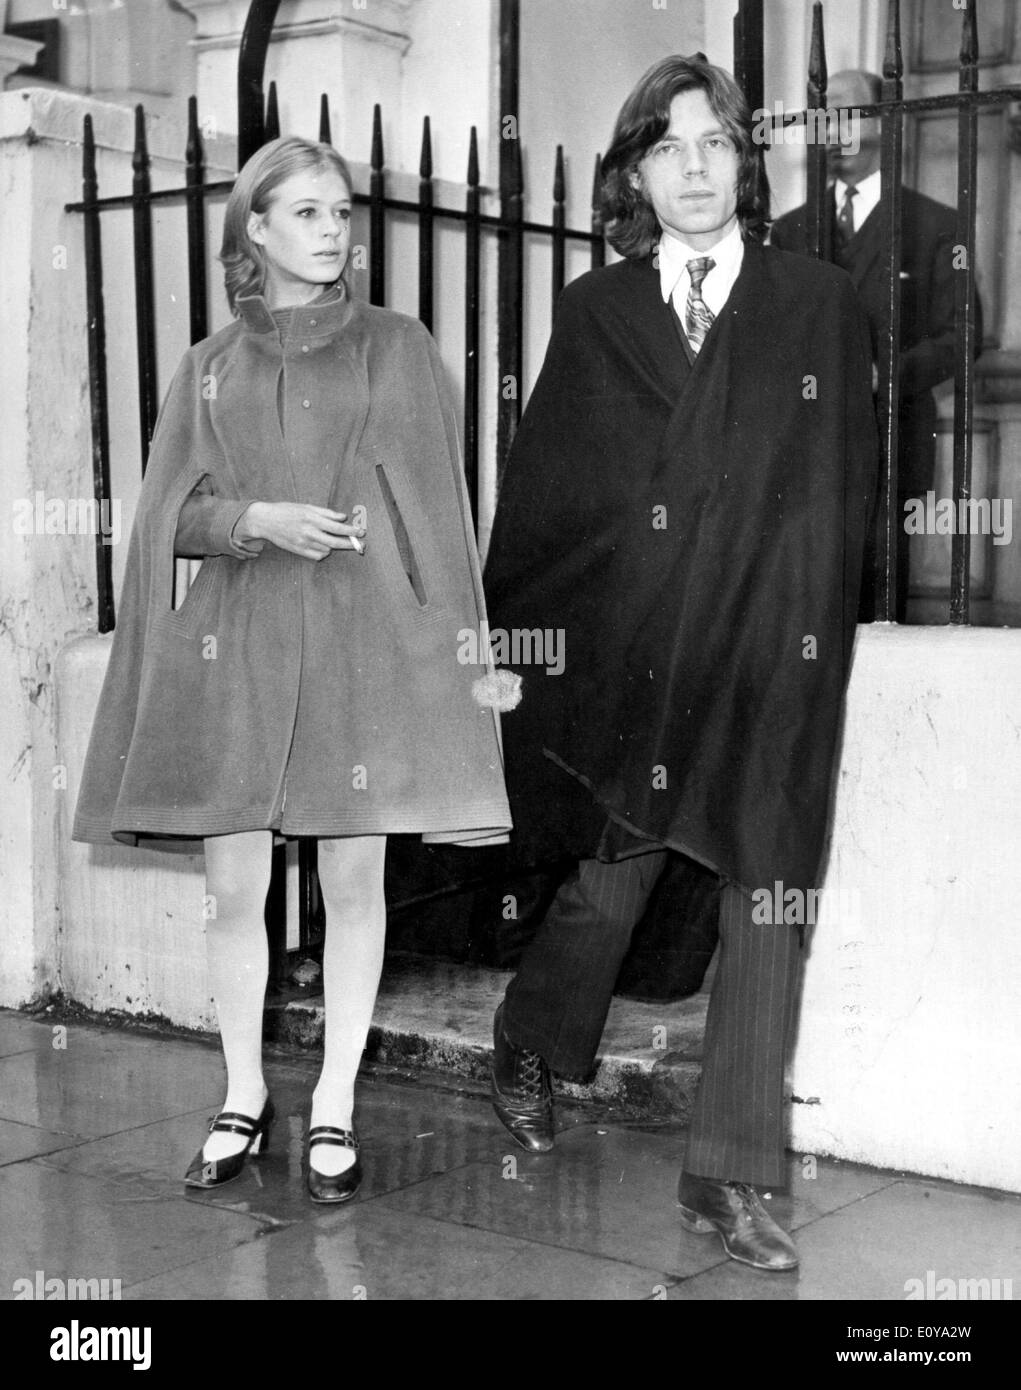 Mick Jagger and Marianne Faithfull leave courthouse Stock Photo